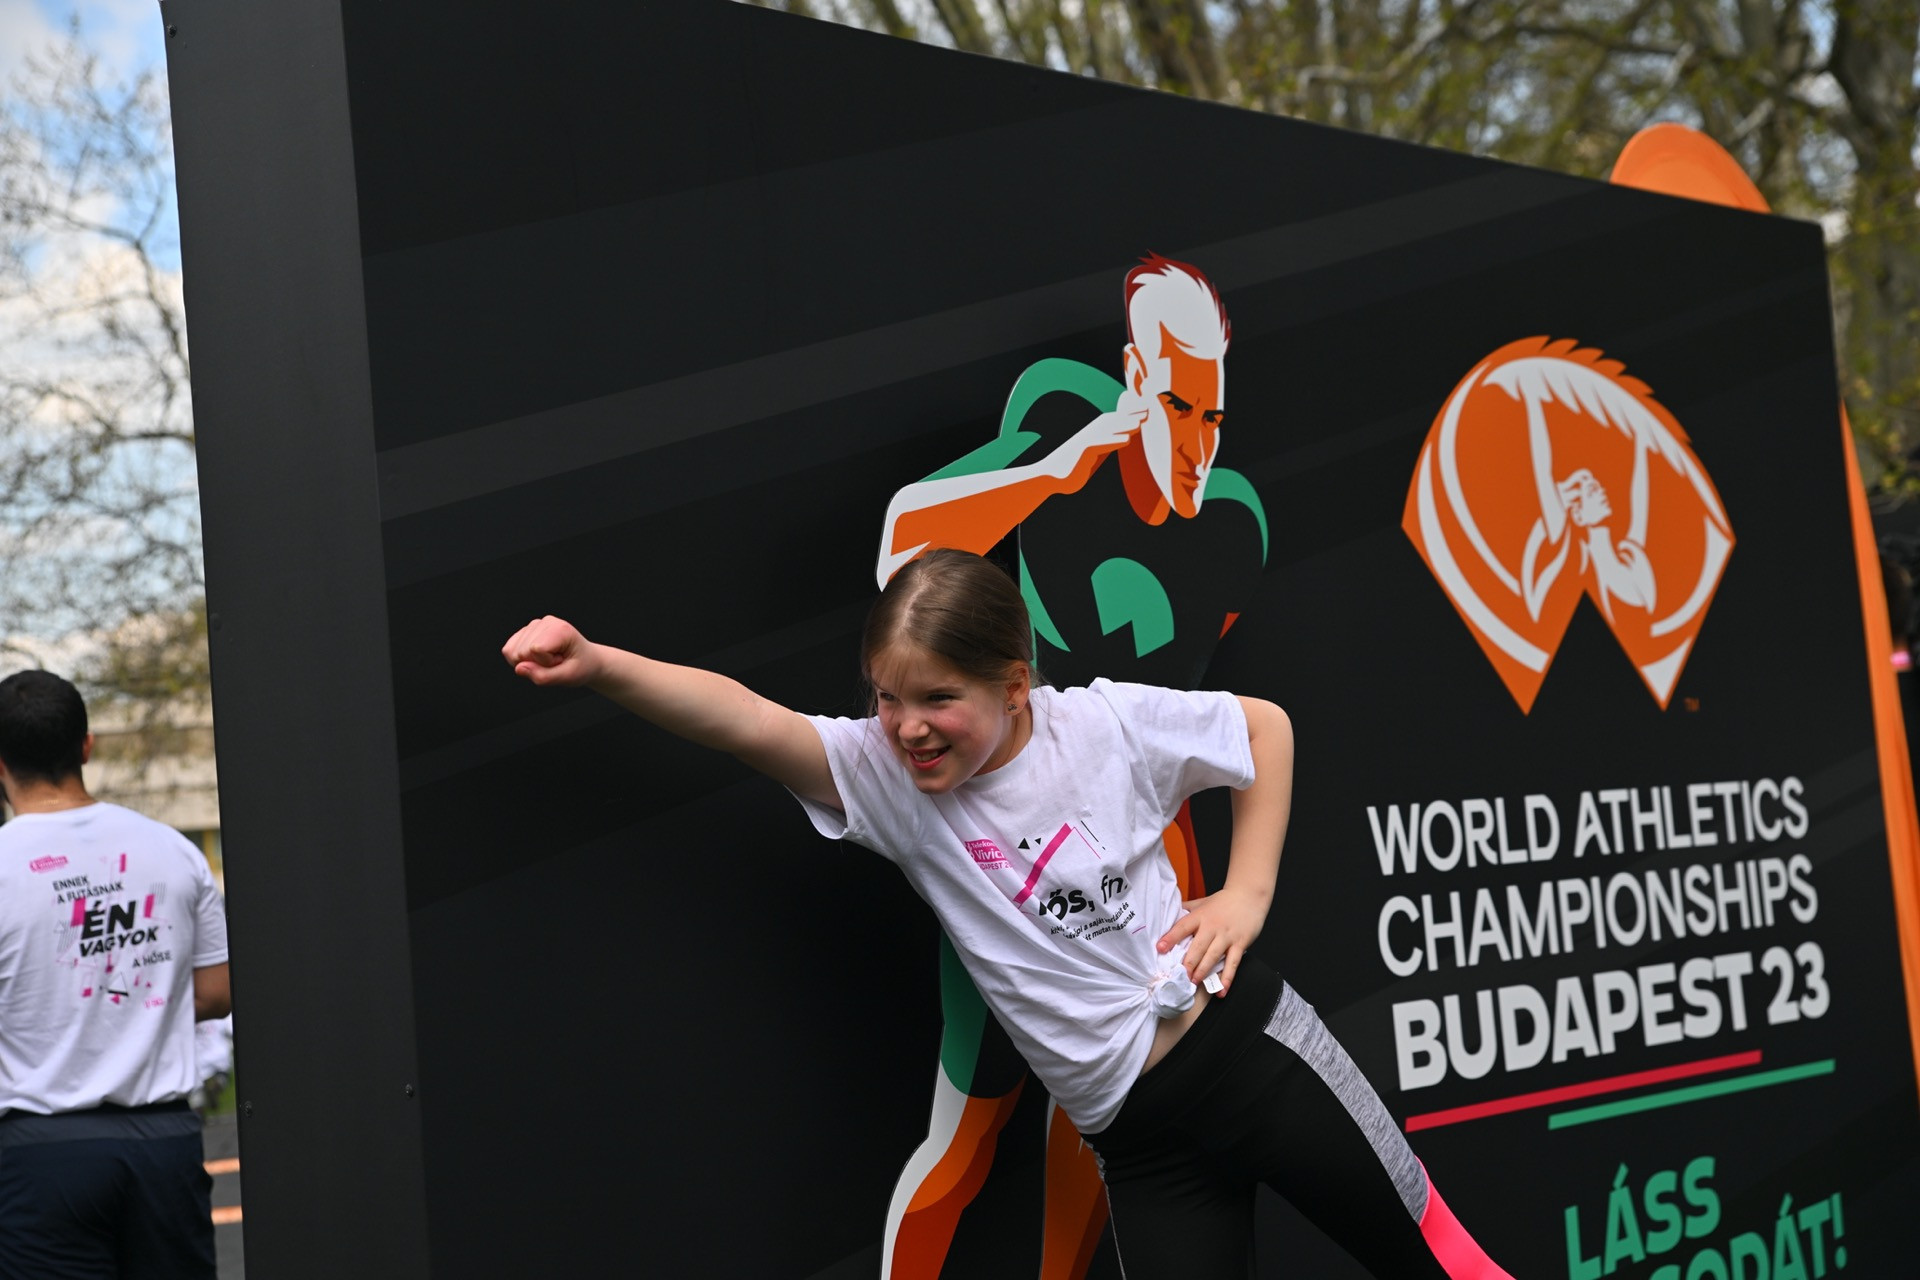 More than 9,000 tickets for Budapest 2023 have been offered to schools ©Budapest 2023